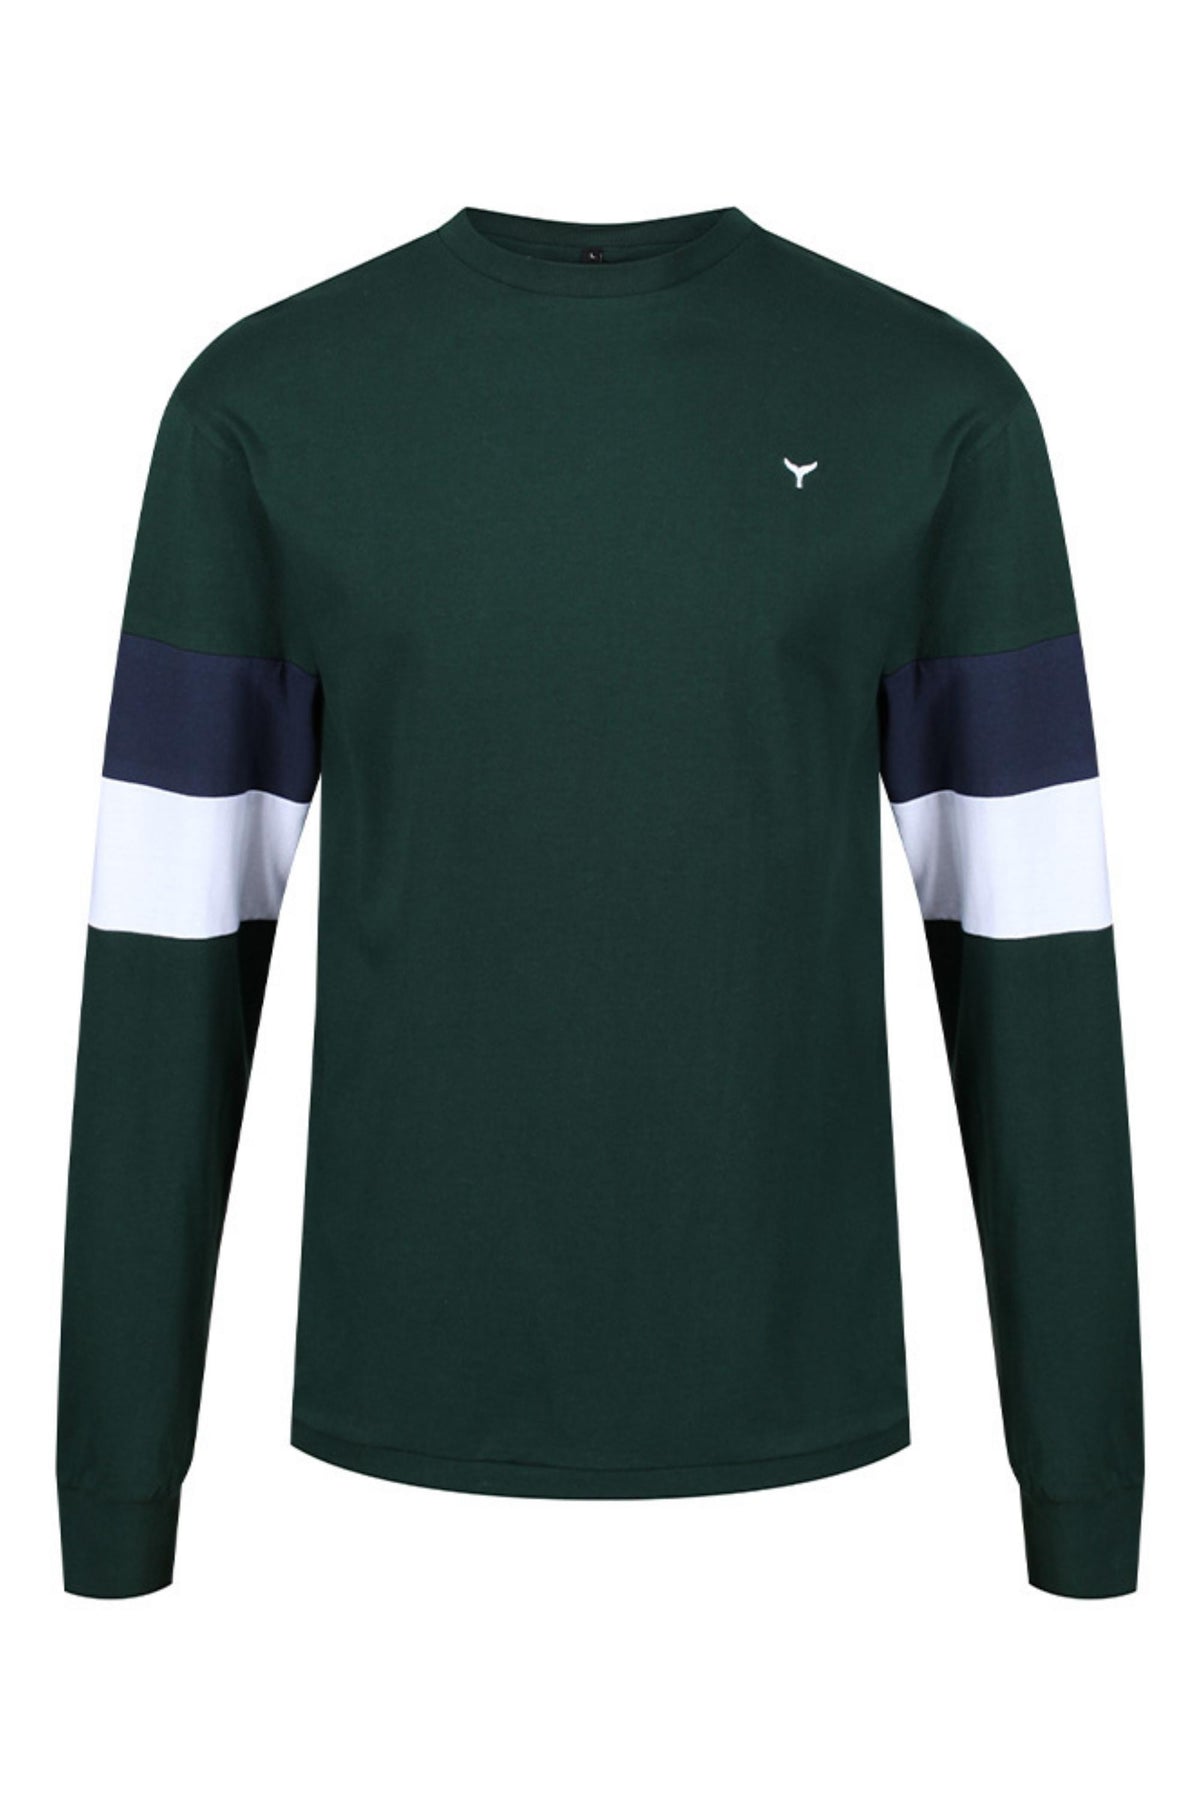 Thornham Unisex Long Sleeved T-Shirt - Green - Whale Of A Time Clothing